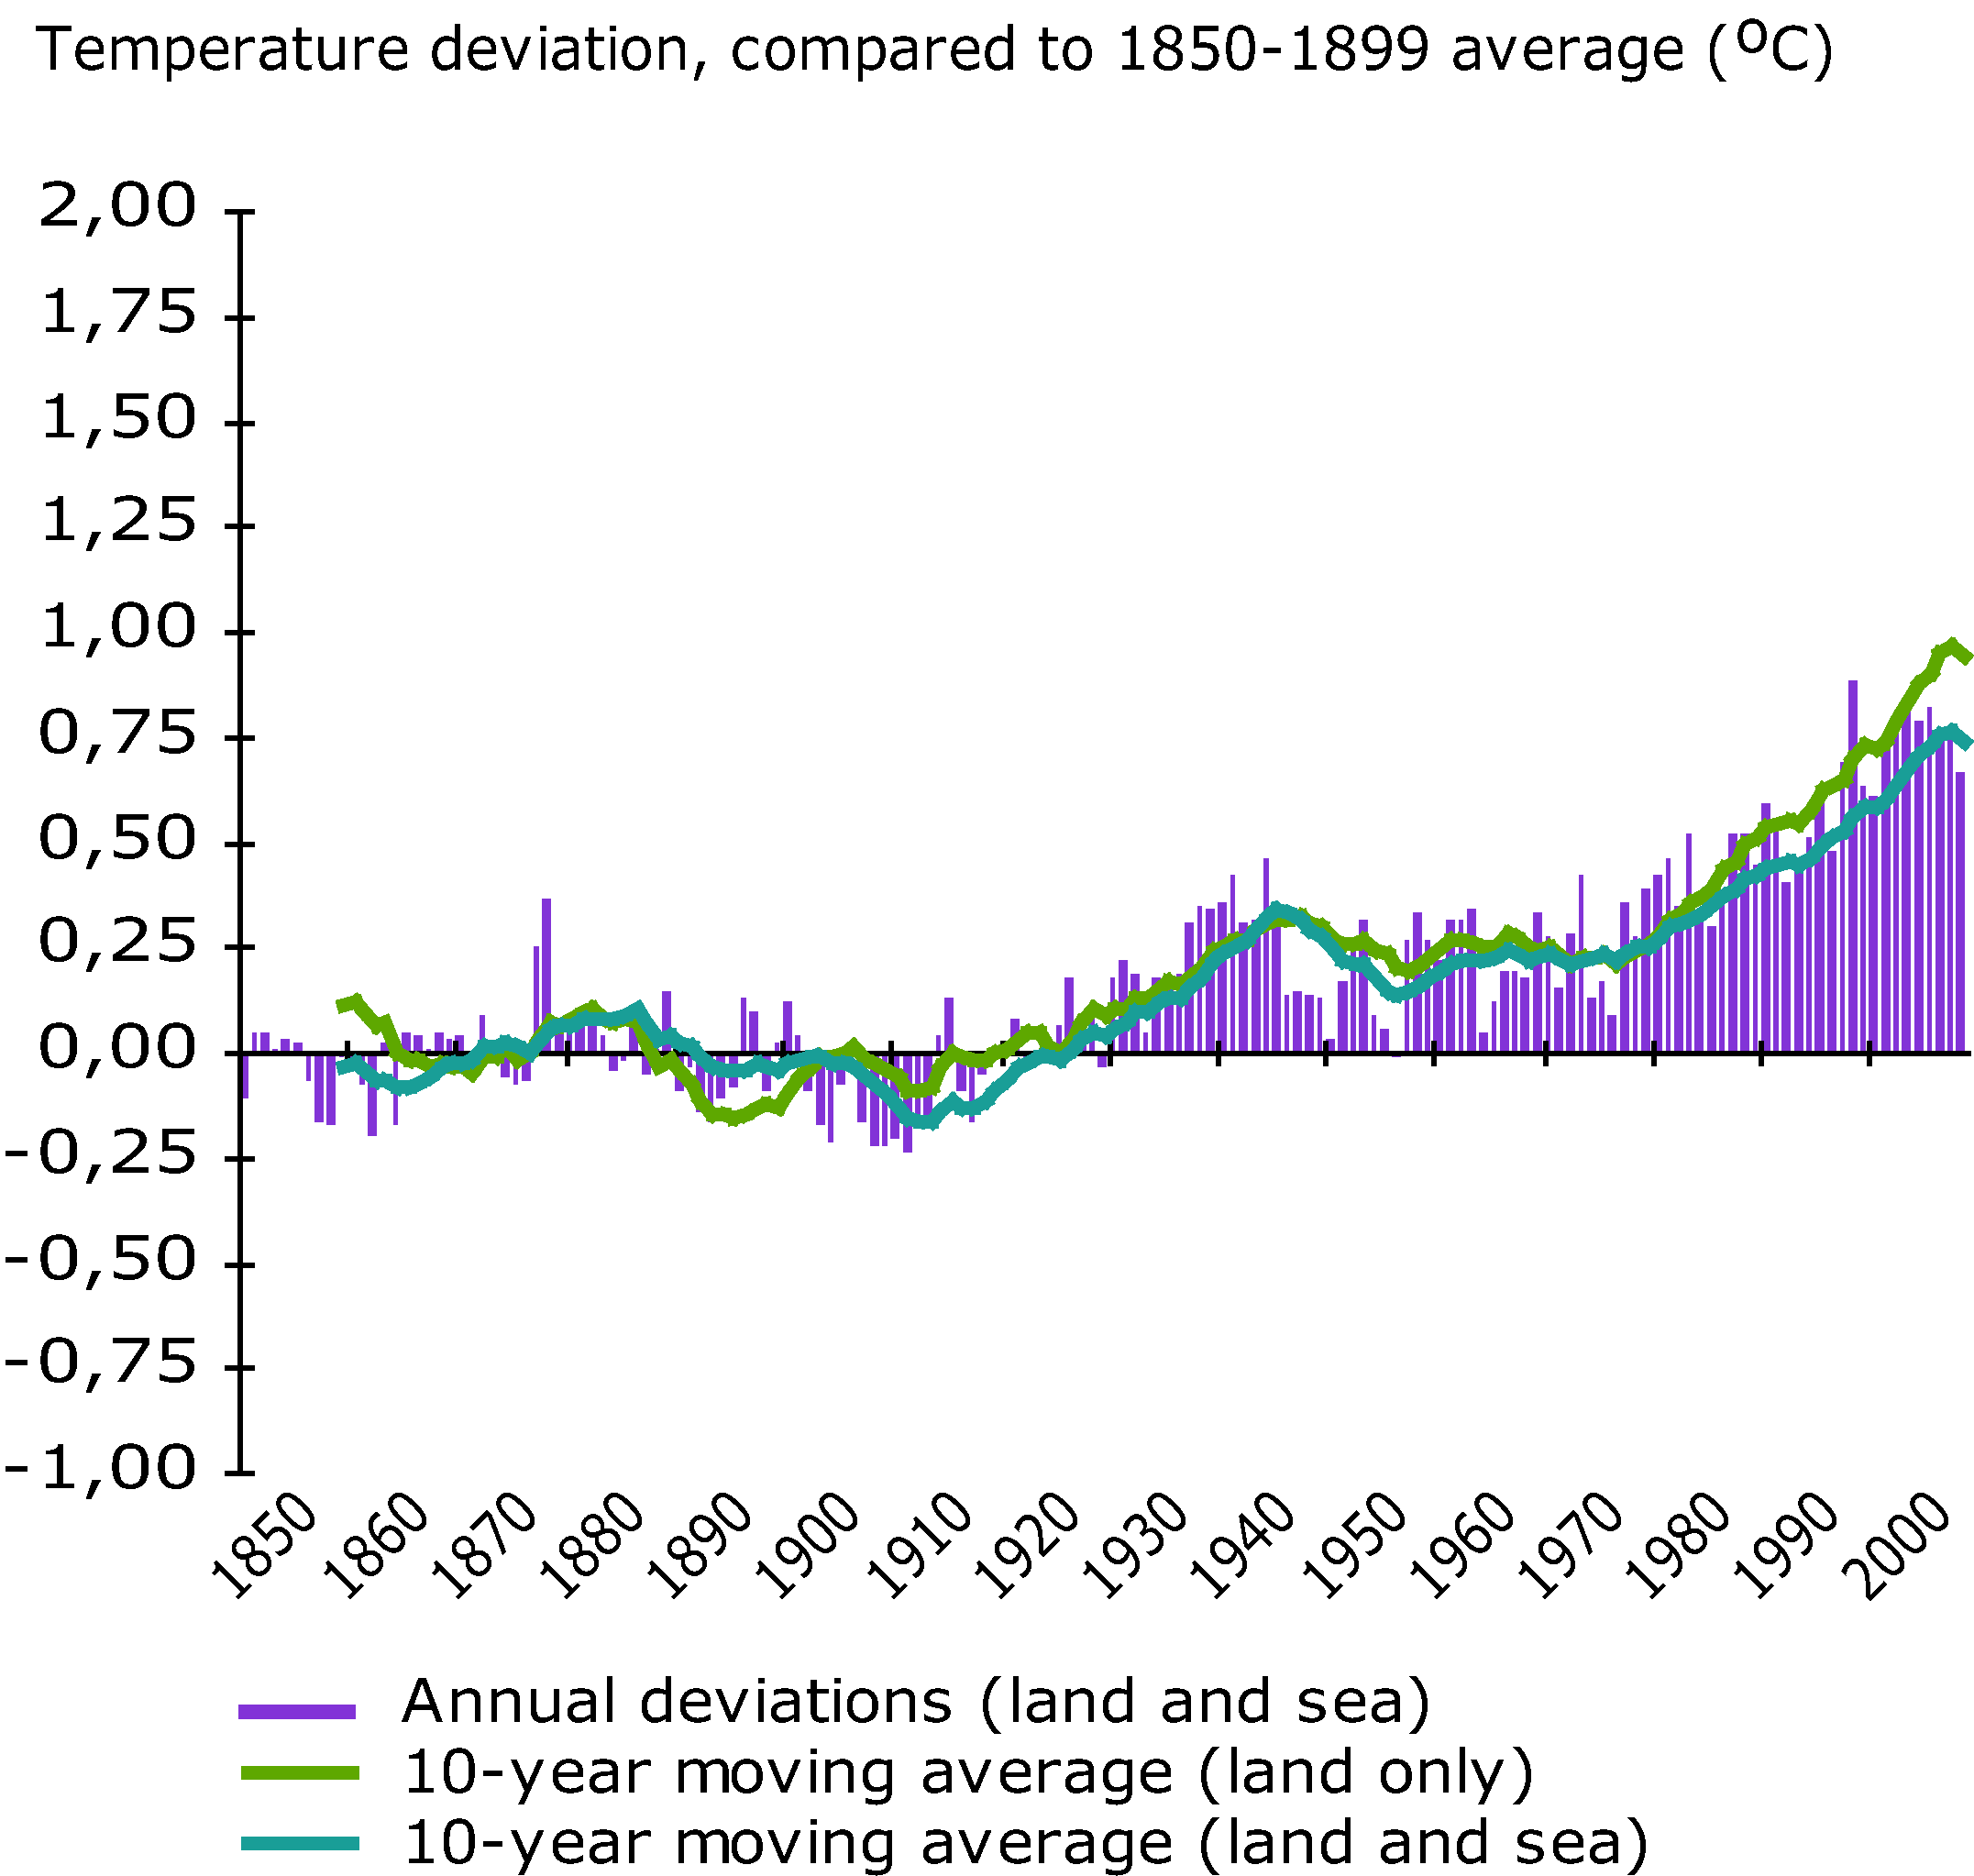 Global annual average temperature deviations, 1850-2008, relative to the 1850-1899 average (in ºC). The lines refer to 10-year moving average, the bars to the annual 'land and ocean' global average.